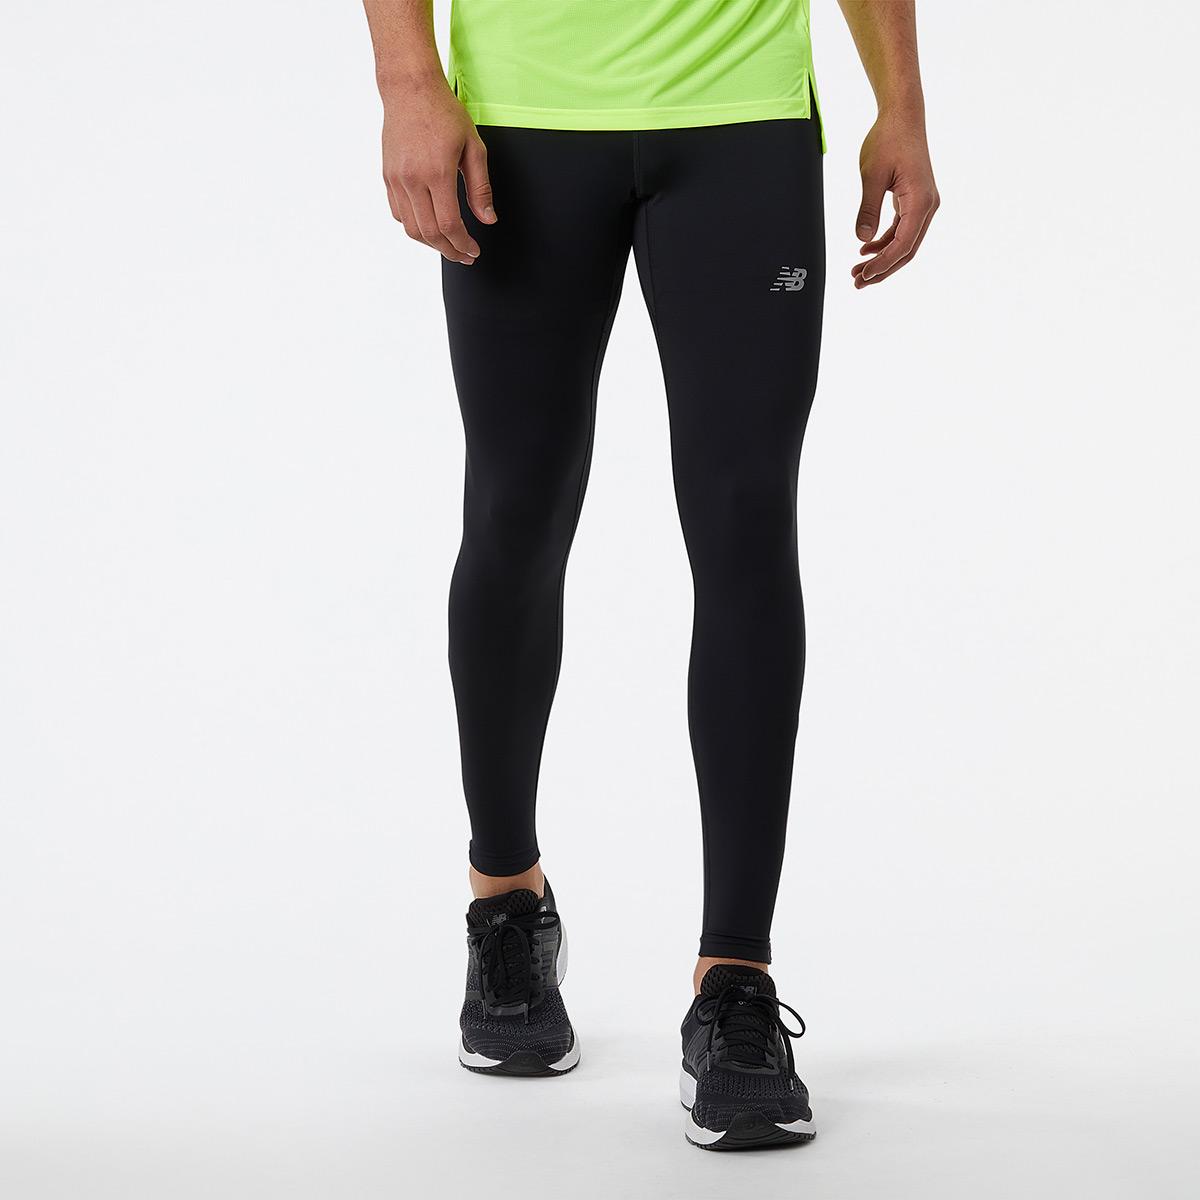 New Balance Accelerate Tights - Black